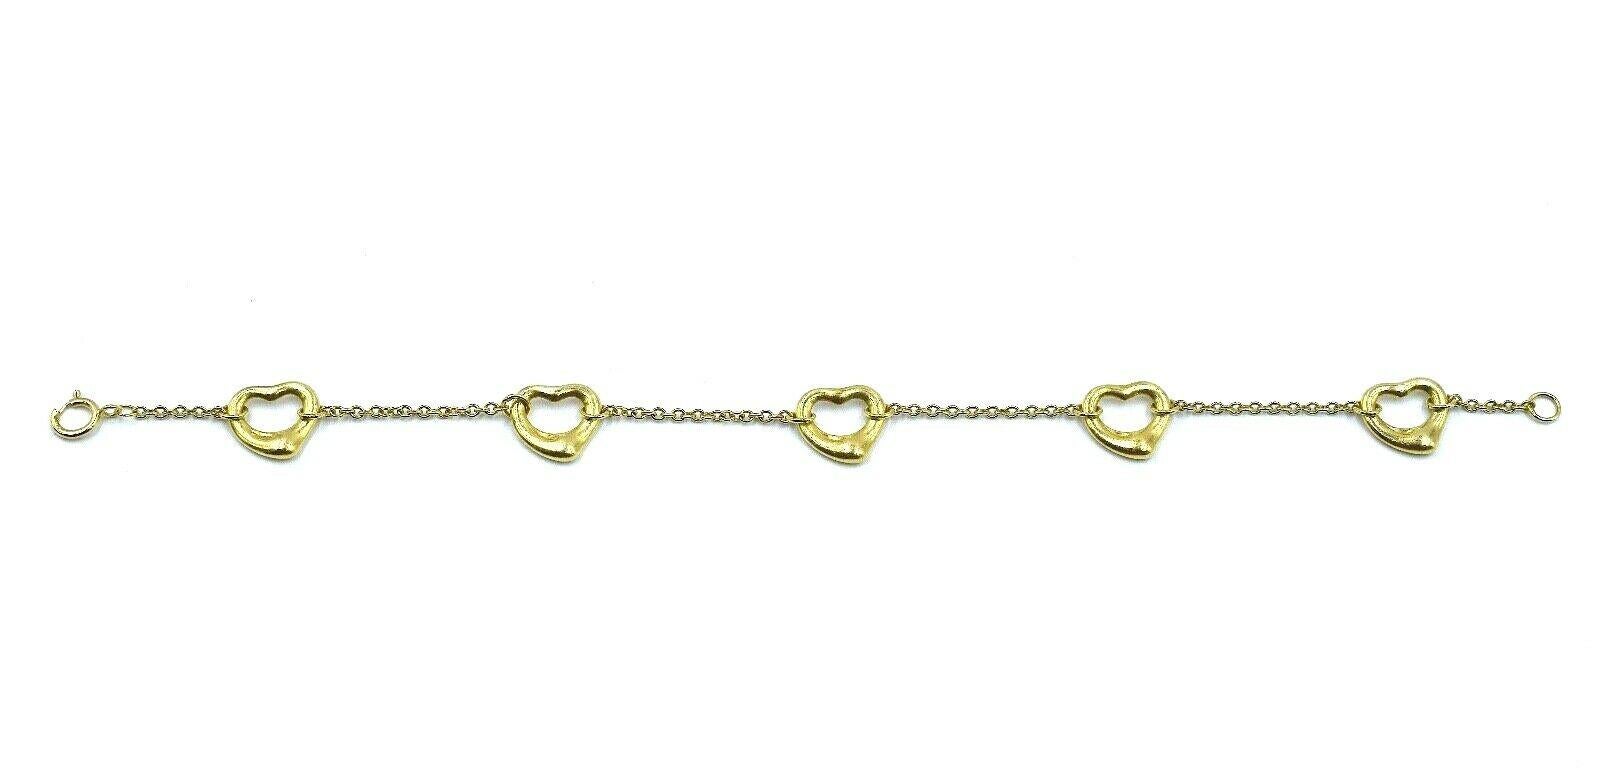 One of Elsa Peretti's most celebrated and iconic pieces from Tiffany & Co., this gorgeous Open Heart bracelet wraps your wrist in a lovely and chic way. The bracelet features five open heart charms that are attached by a delicate 18k yellow gold